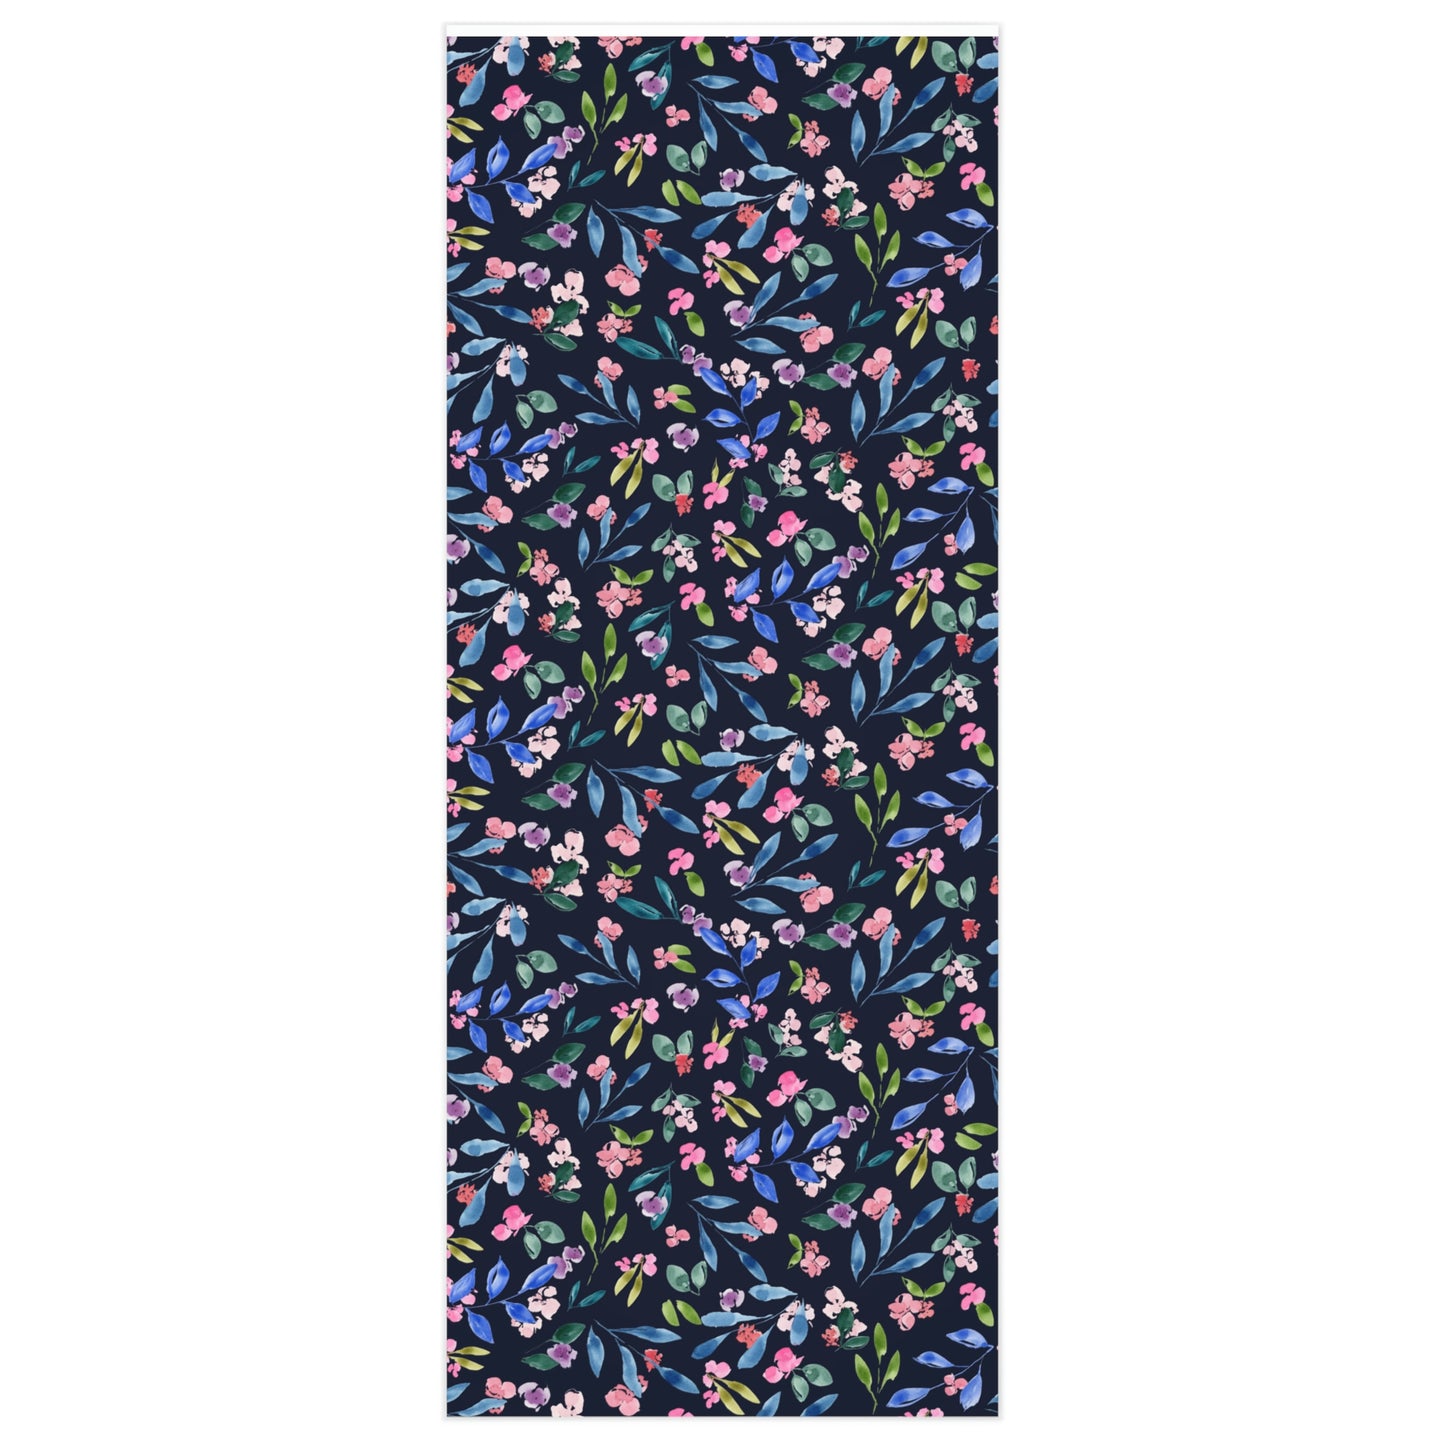 Loose Floral Wrapping Paper Blue